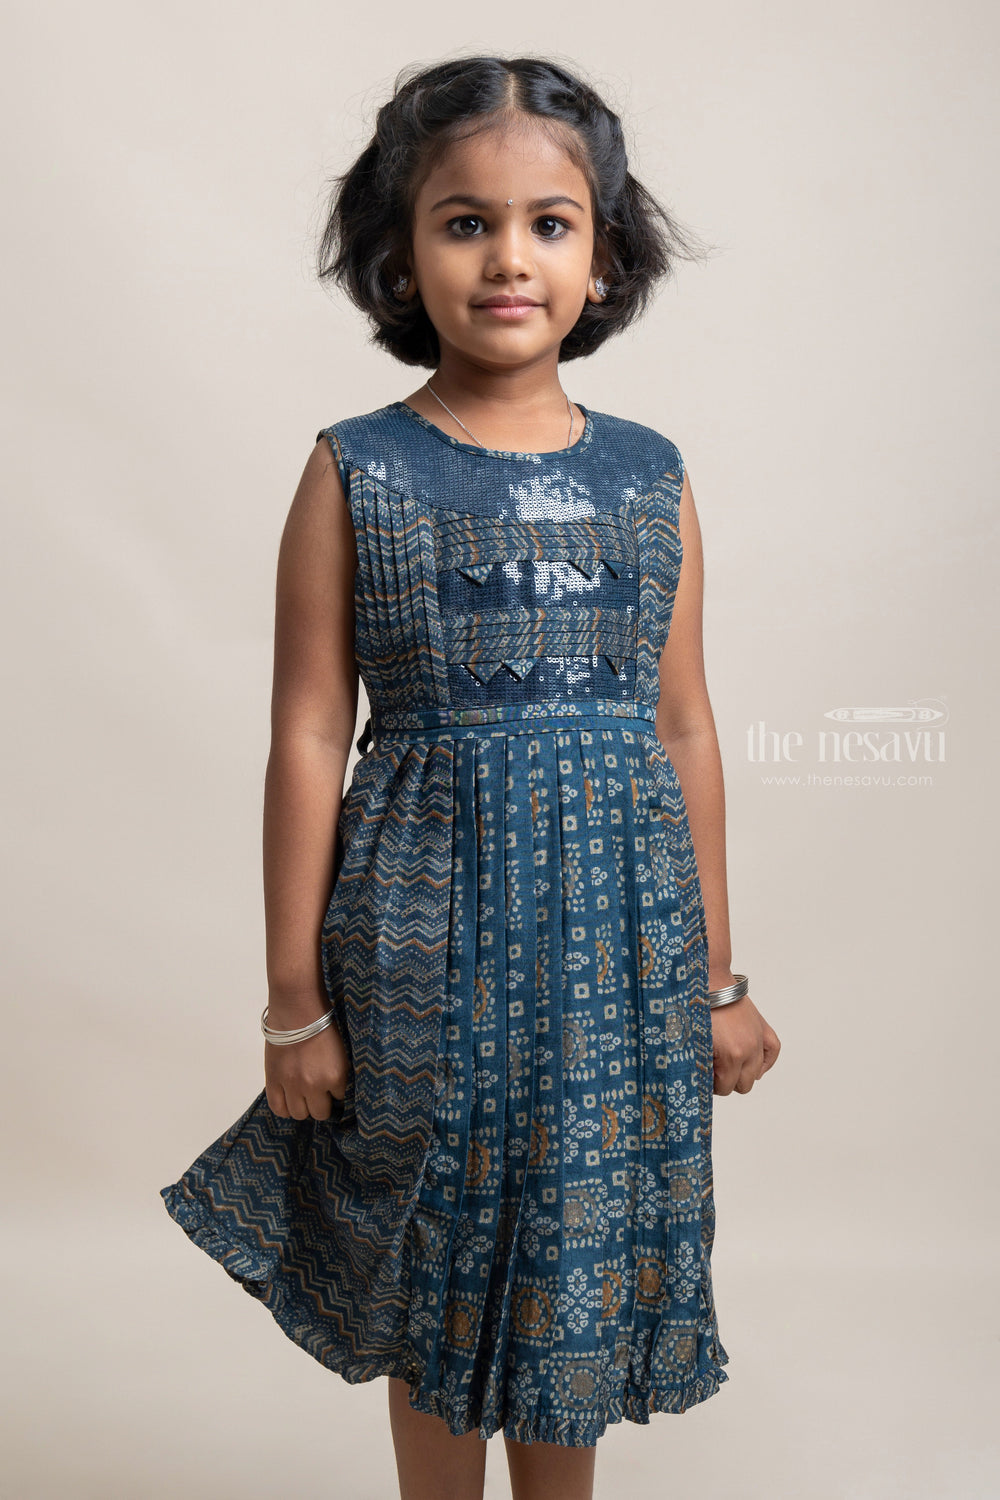 The Nesavu Girls Cotton Frock Mind-Blowing Navy Zig-Zag Geometric Printed Cotton Frock For Girls Nesavu Stylish Cotton Frock For Girls | Printed Cotton Frock | The Nesavu